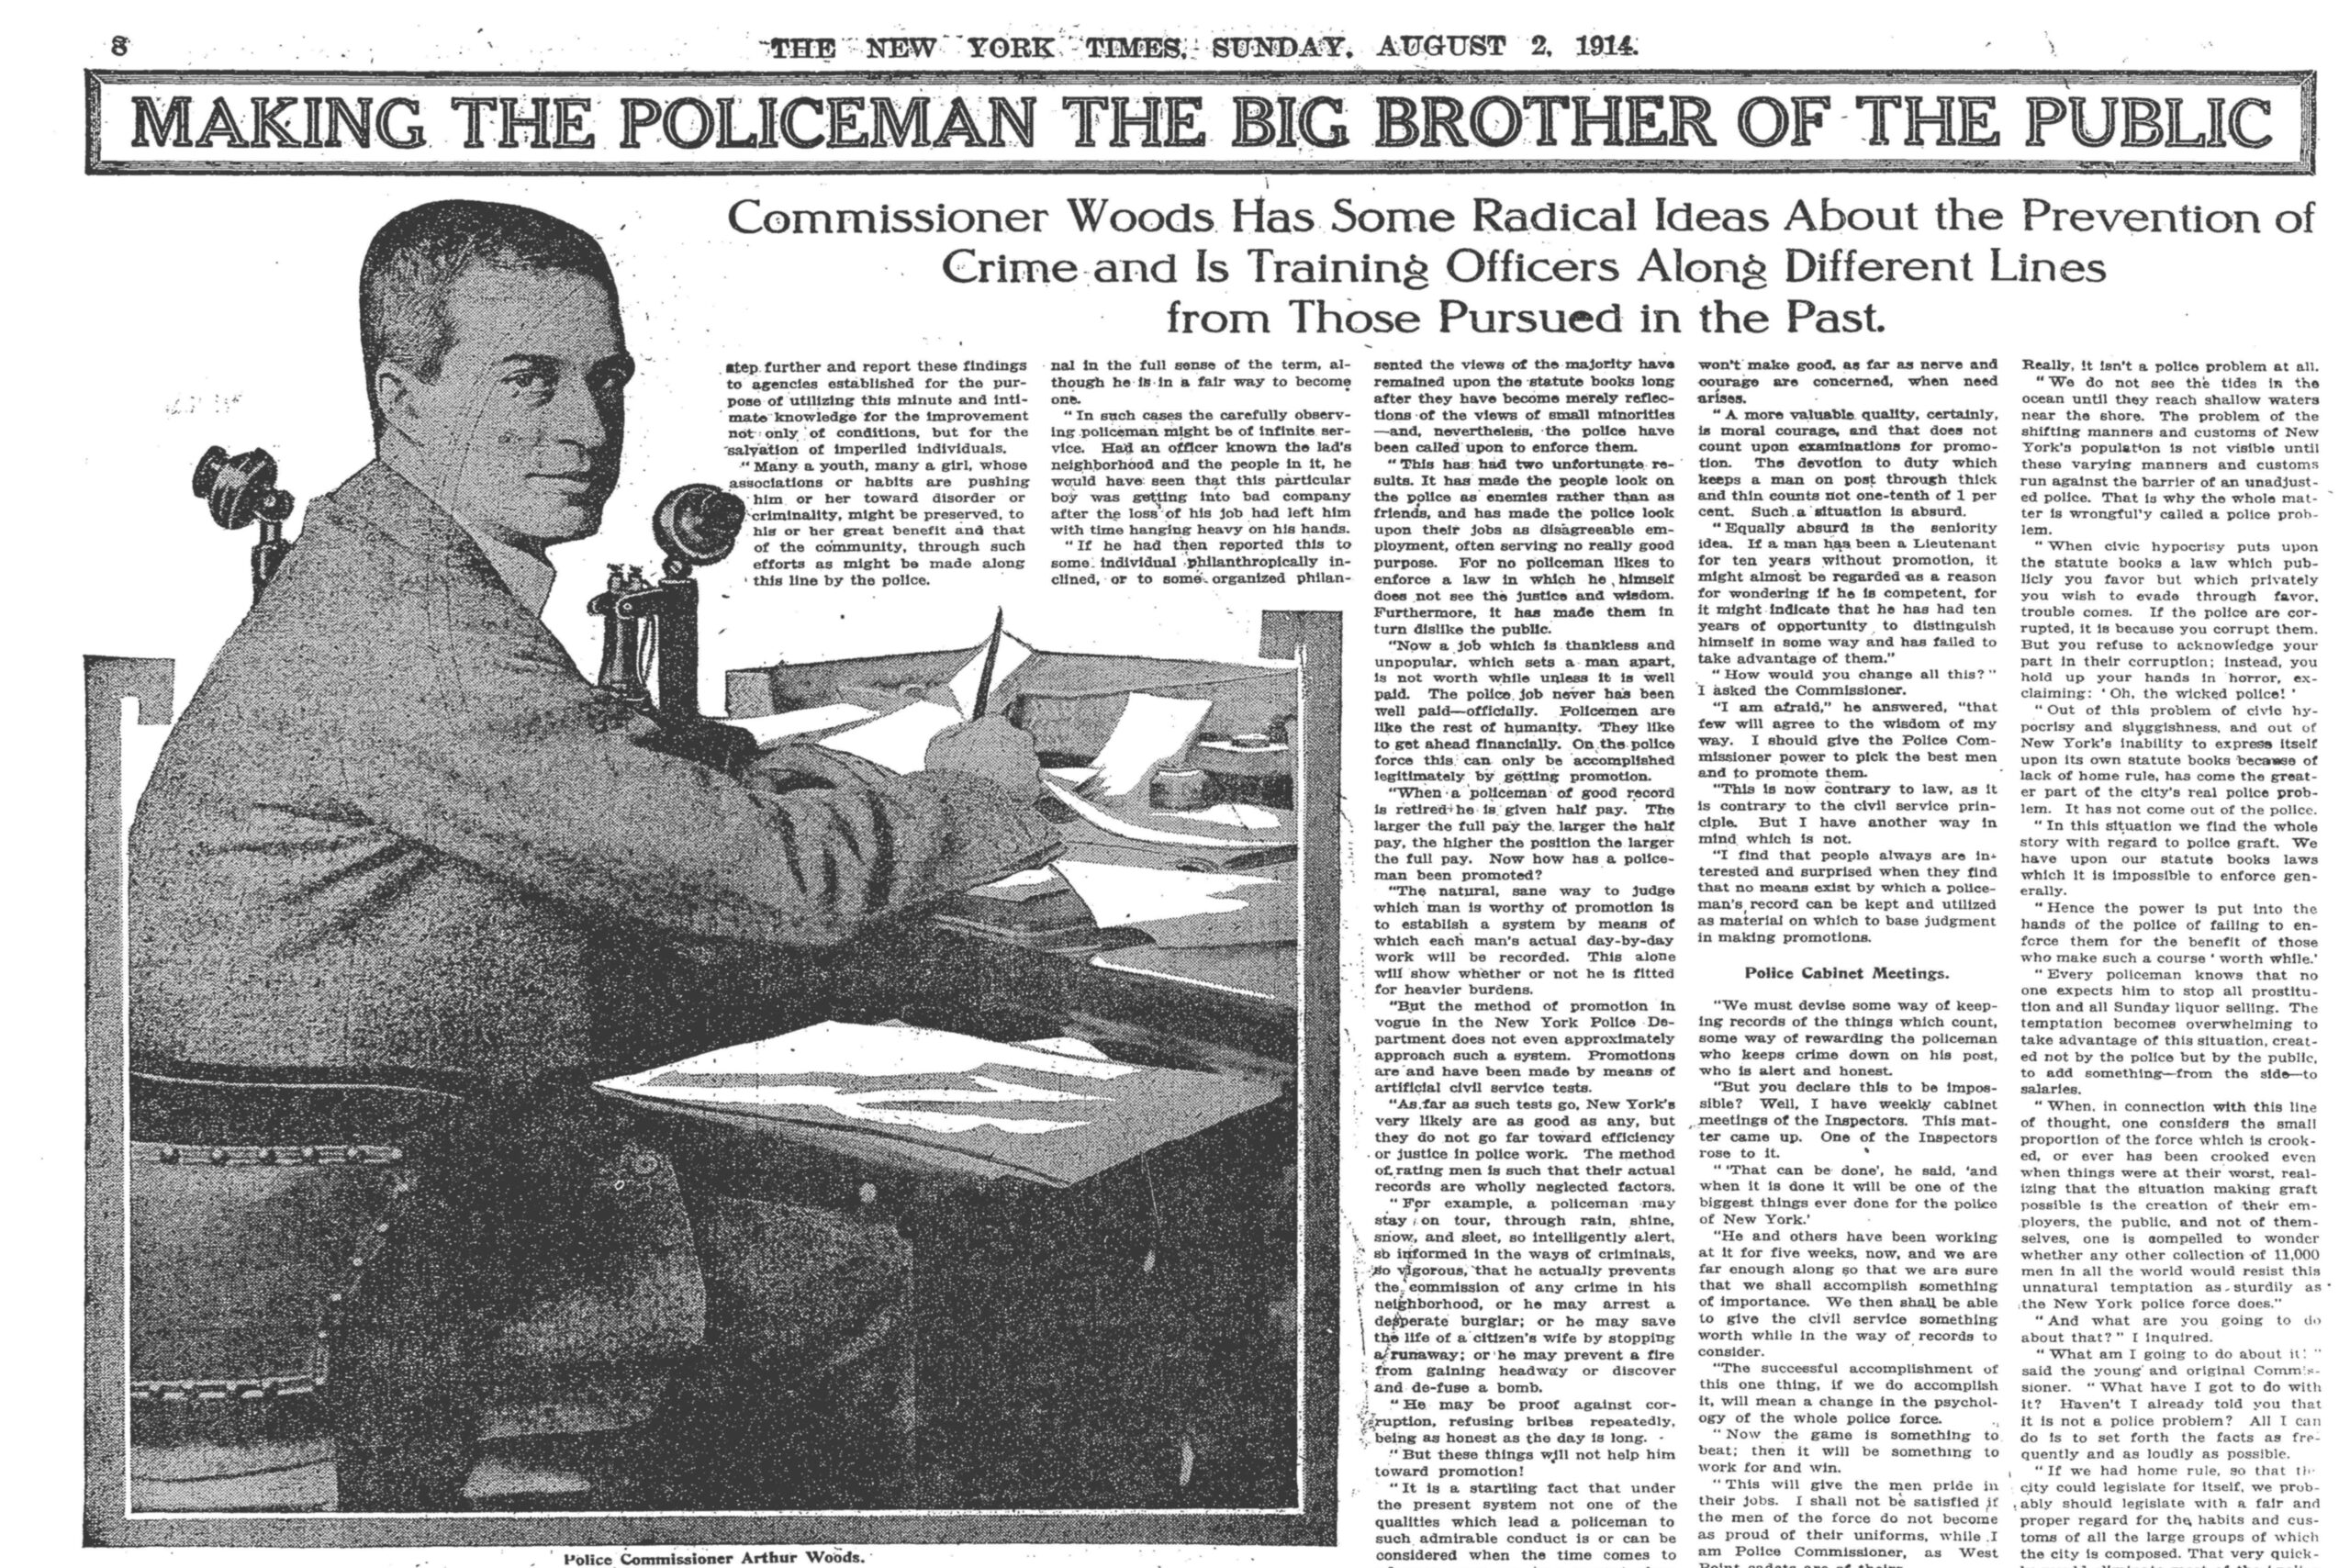 Black and white newspaper article with heading, "Making the Policeman the Big Brother of the Public." Subheading reads, "Commissioner Woods Has Some Radical Ideas About the Prevention of Crime and Is Training Officers Along Different Lines from Those Pursued in the Past." Includes image of Woods seated at a desk, facing the viewer.